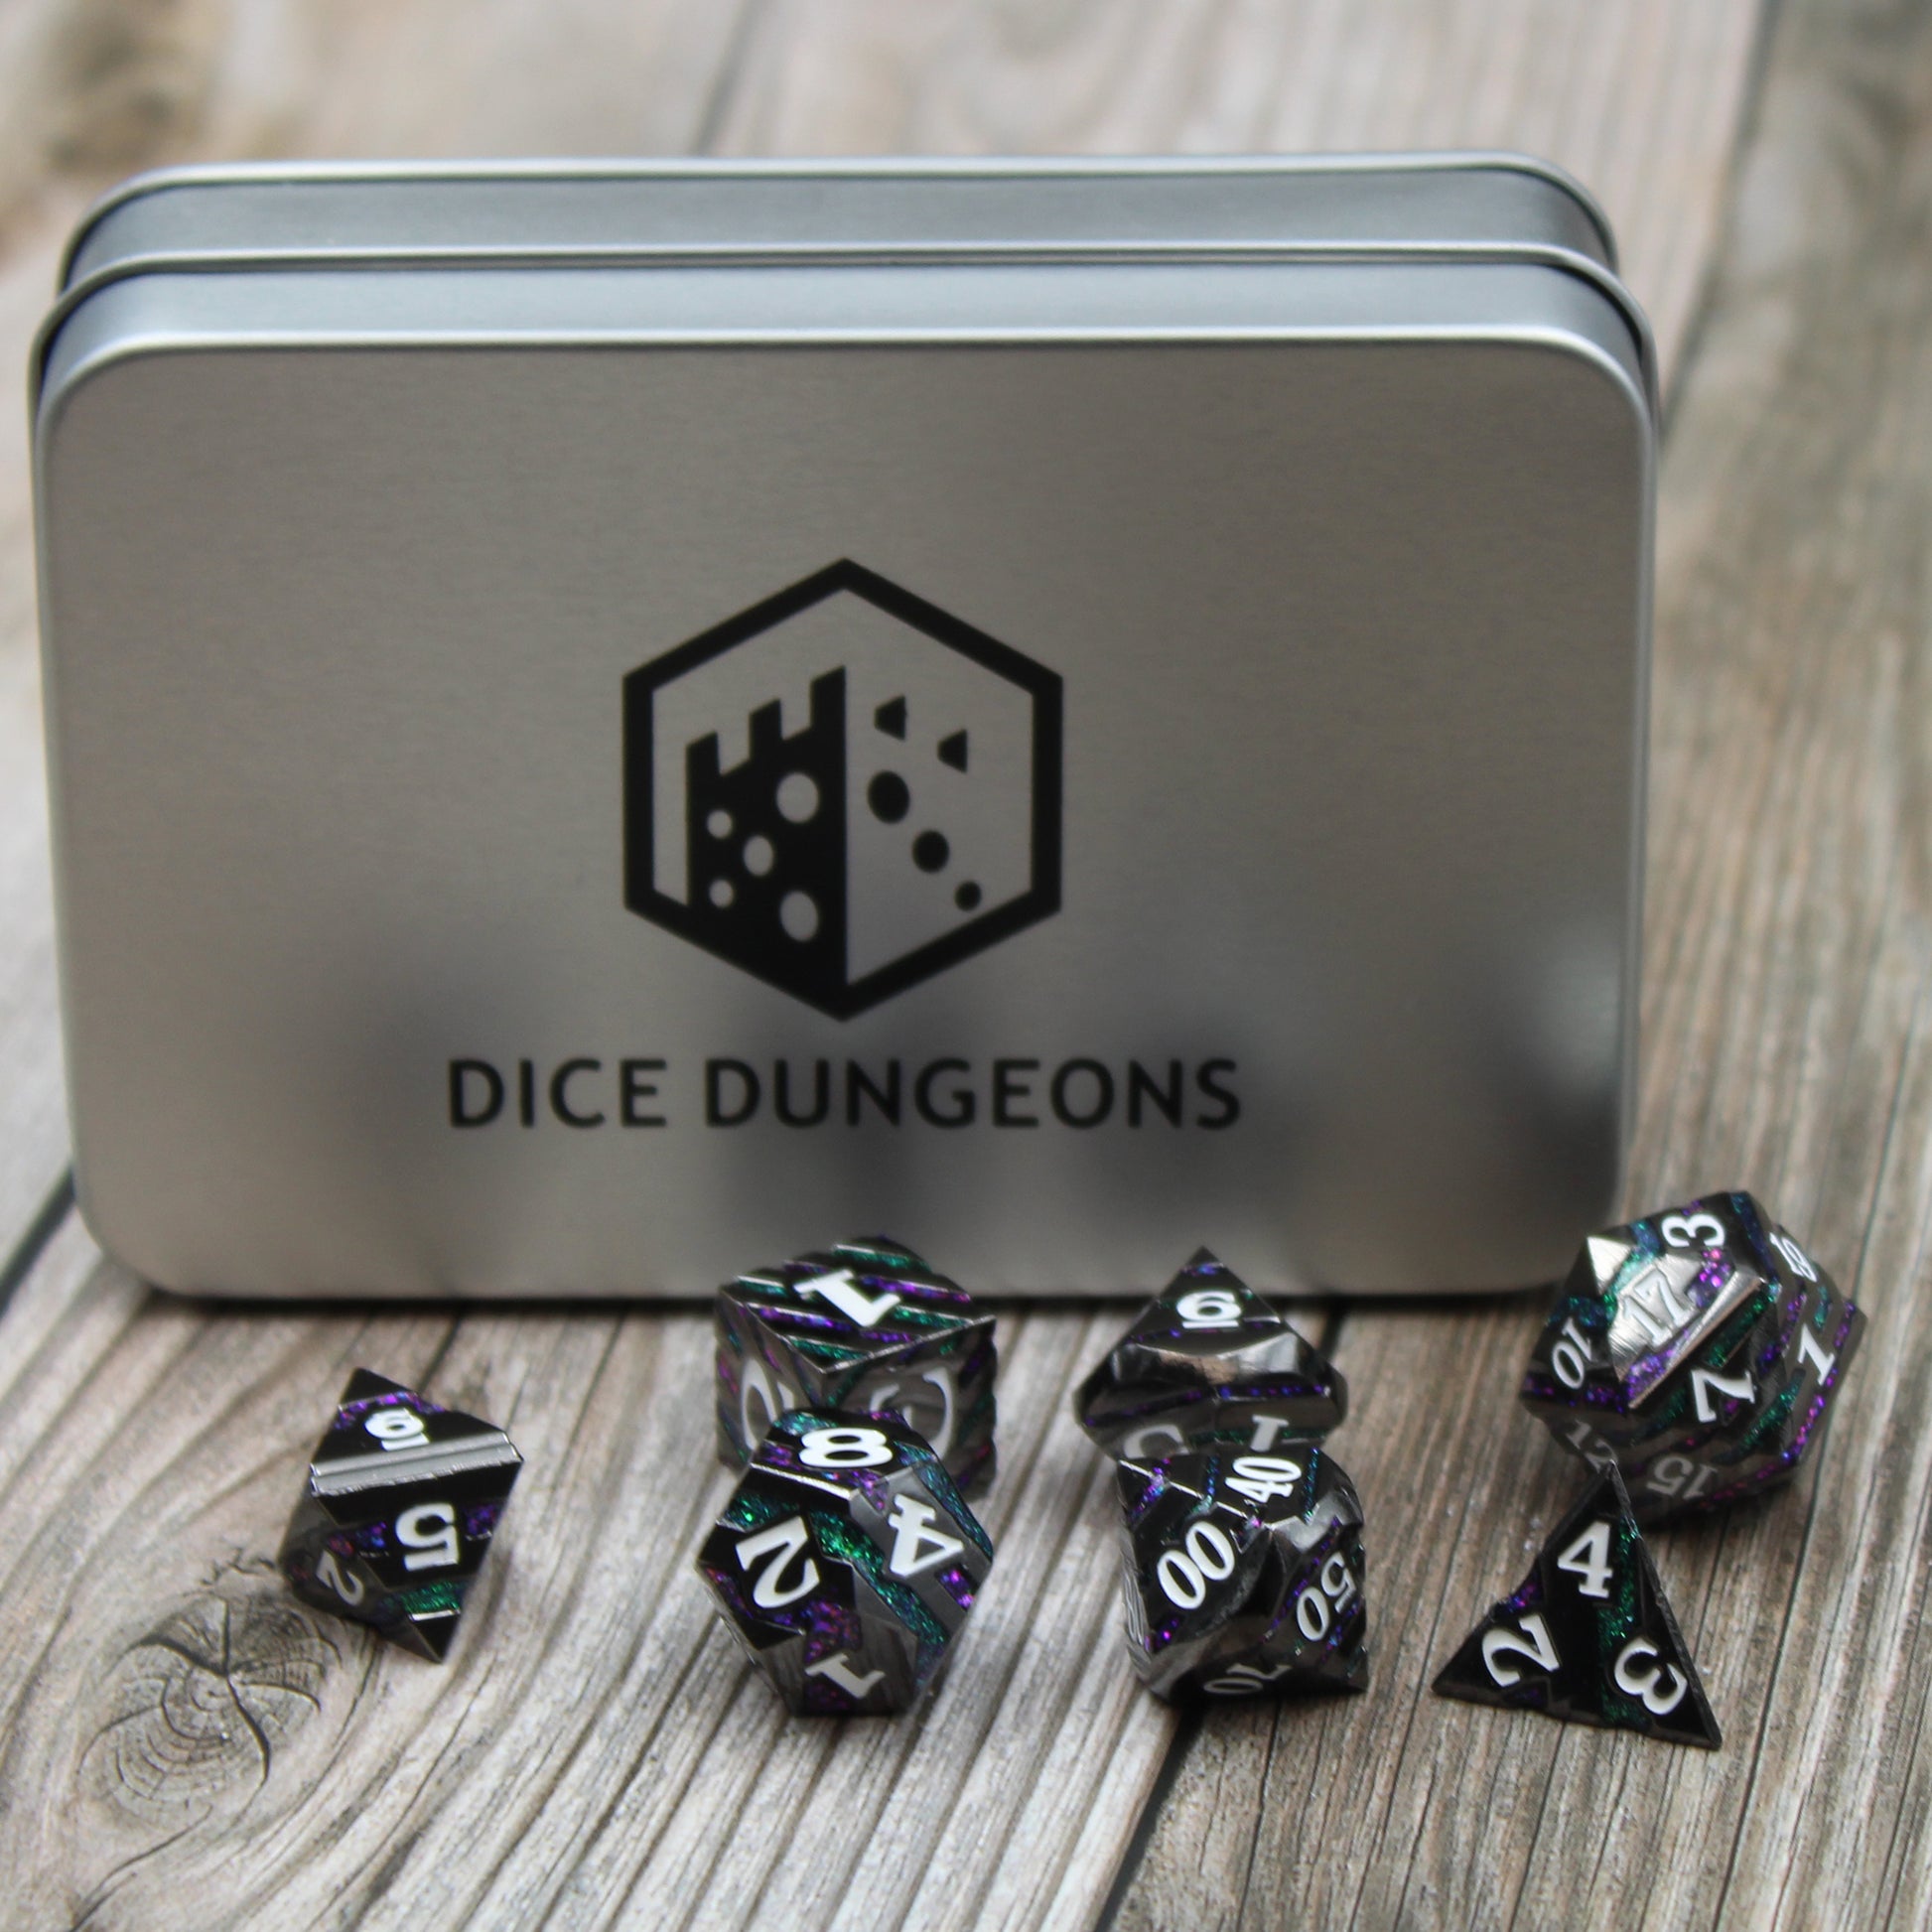 Box and dice for blakc striped metal dice.